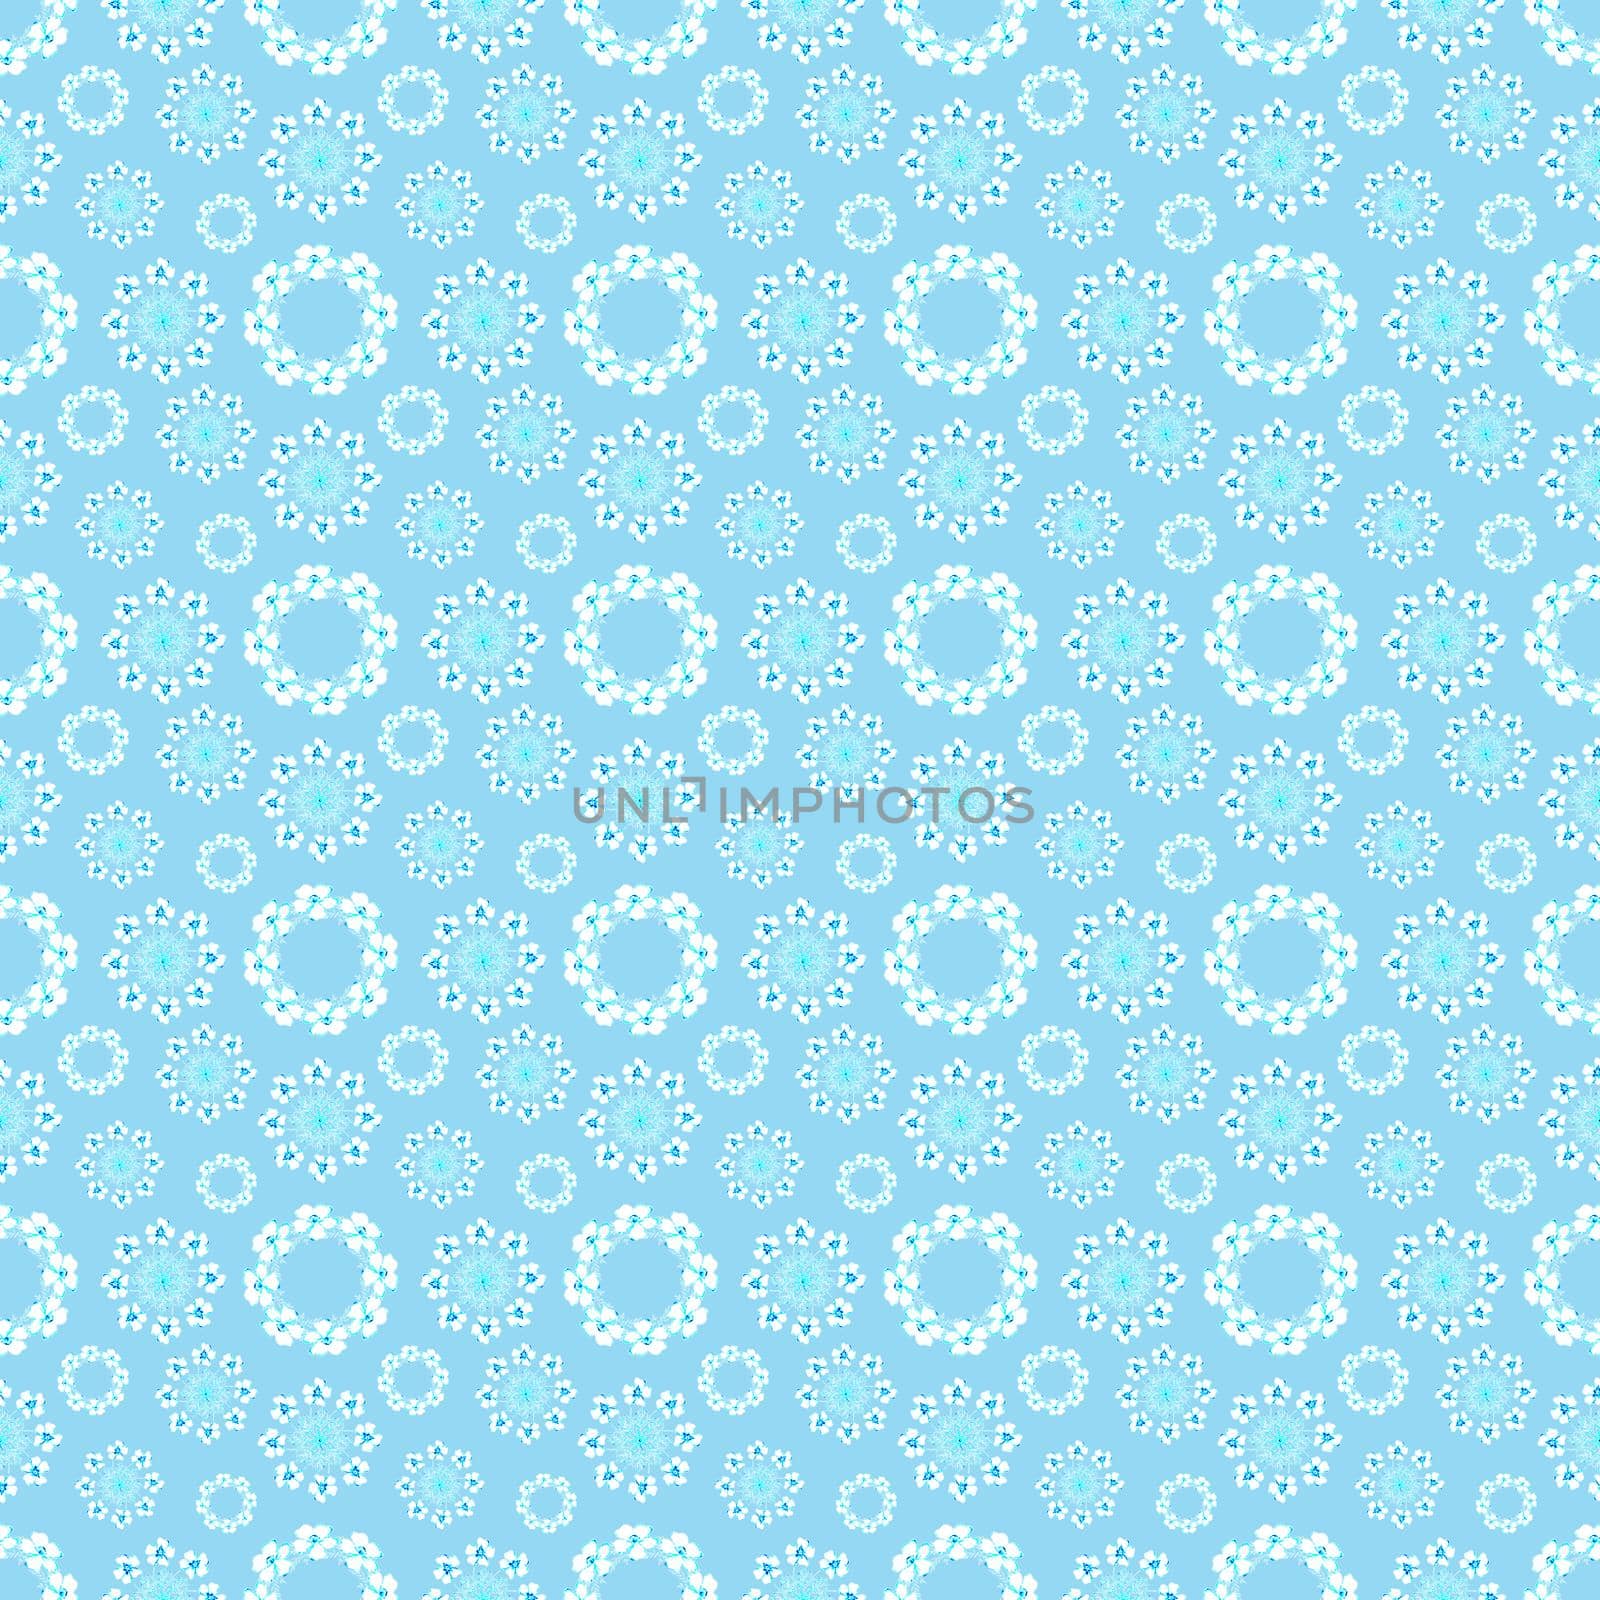 Seamless Pattern with Hand-Drawn Flower. Blue Background with Thin-leaved Marigolds for Print, Design, Holiday, Wedding and Birthday Card.